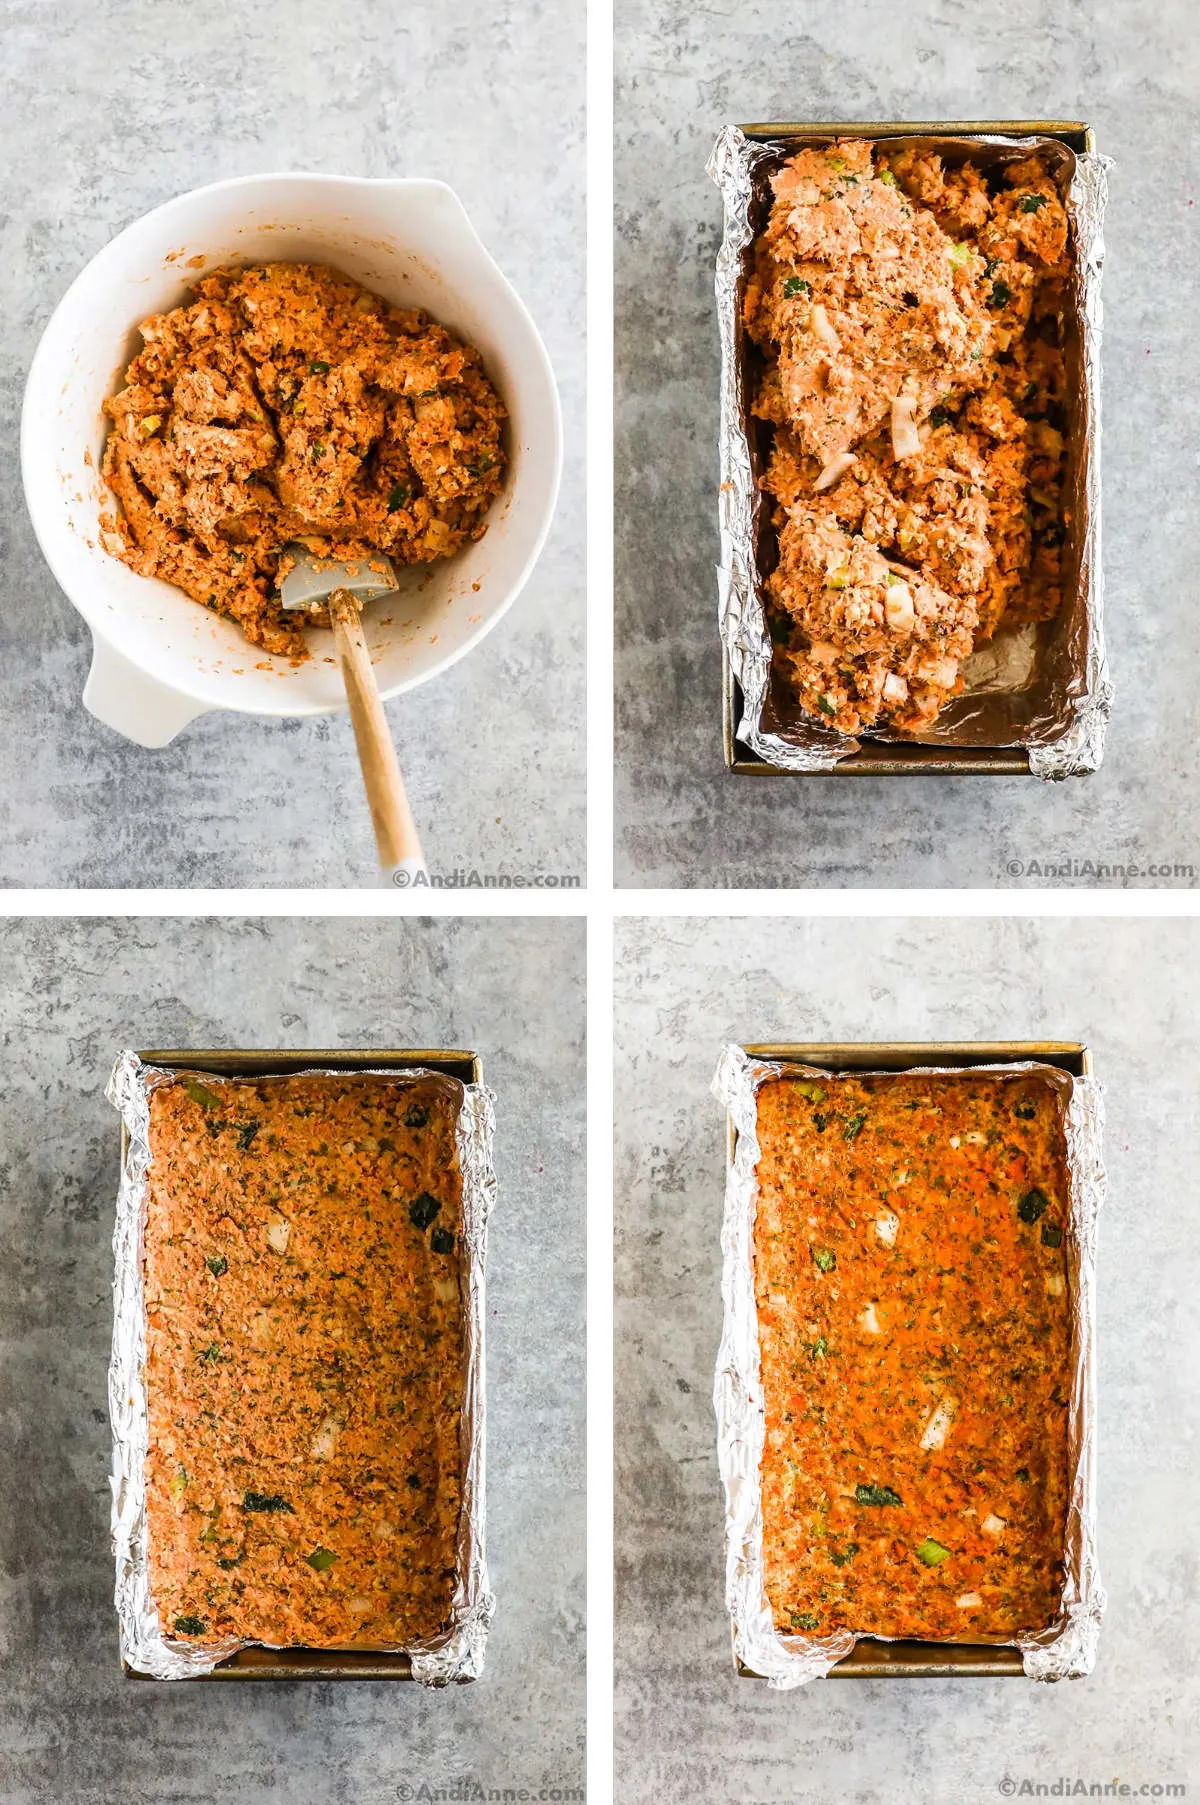 Four images in one. 1. The milk and egg mixture is mixed thoroughly with the salmon and spice mixture. 2. Finished mixture of all ingredients is added to loaf pan. 3. Mixture is packed down into loaf pan. 4. Salmon loaf is finished baking. 